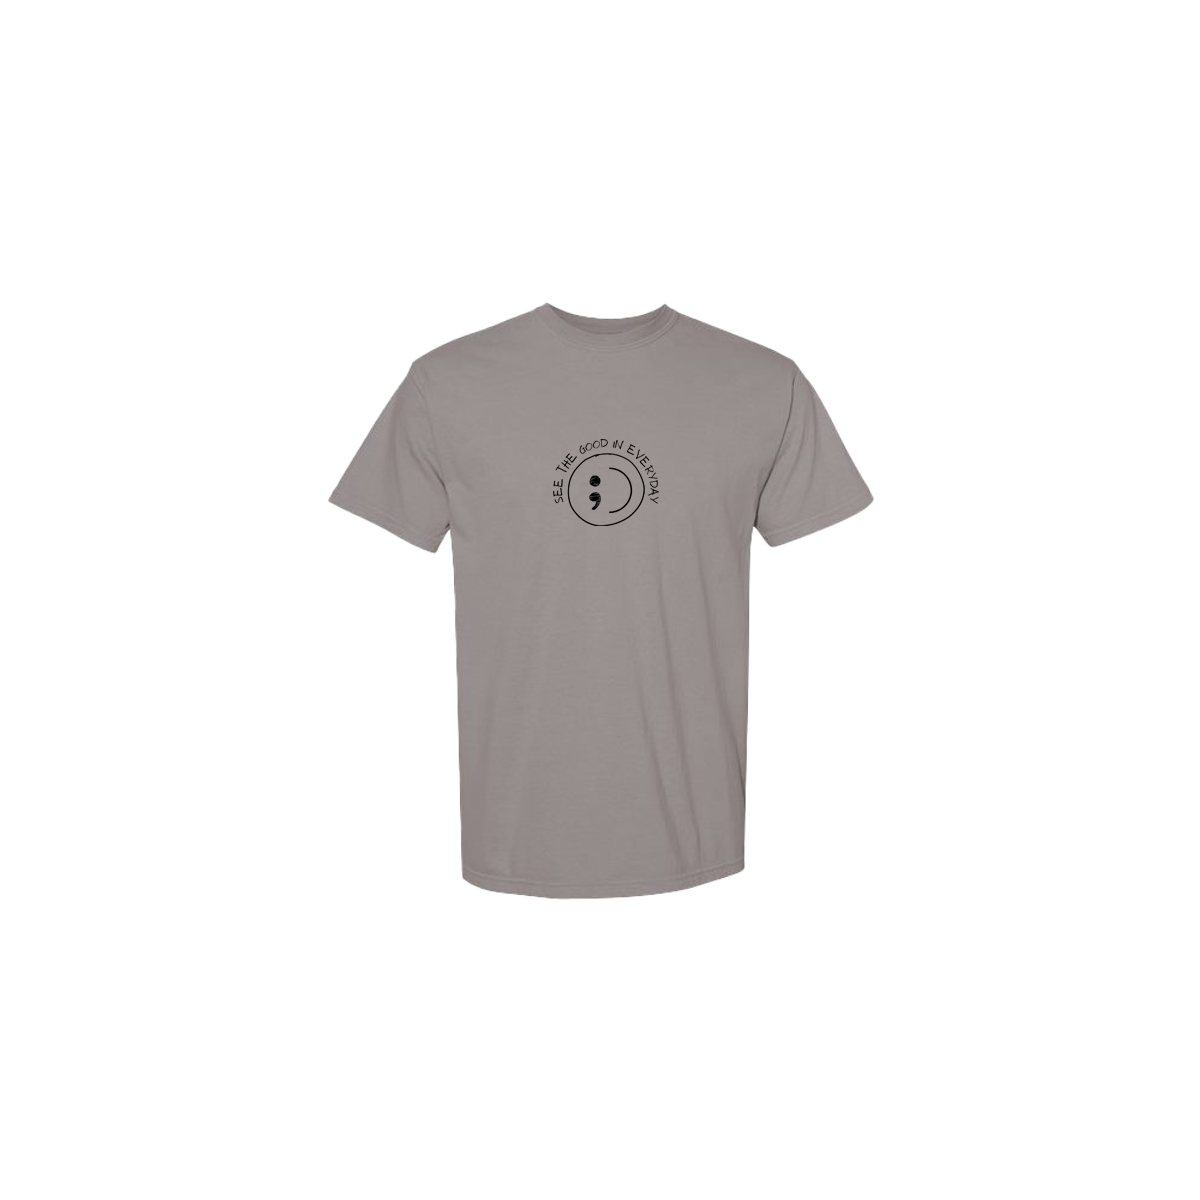 See the Good in Everyday Smiley Embroidered Grey Tshirt - Mental Health Awareness Clothing